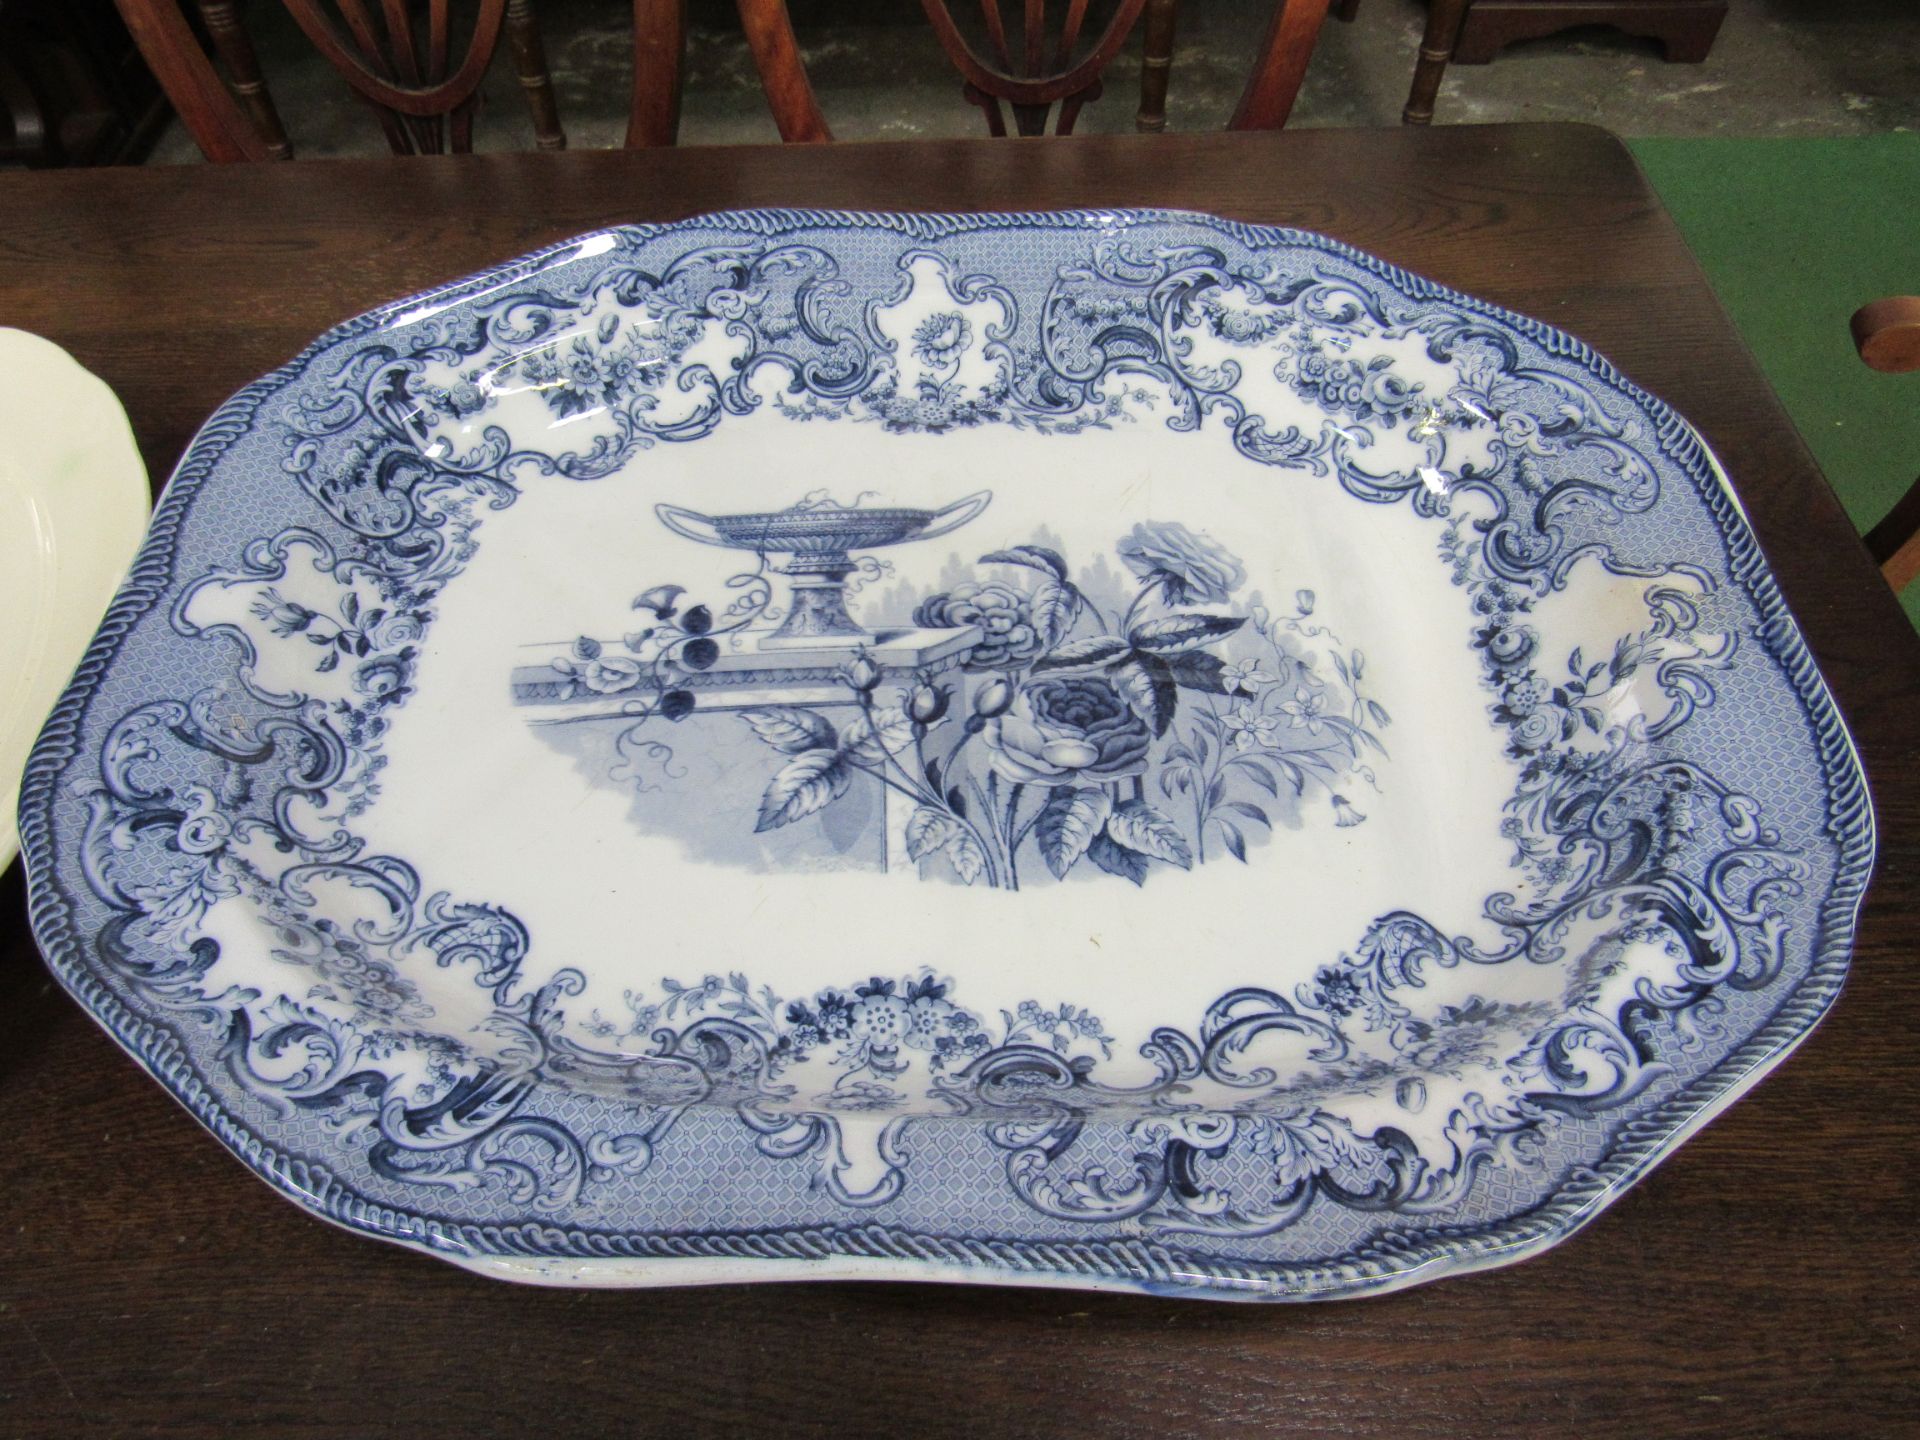 Copeland meat plate and matching serving plate as found together with a cream serving plate, 54 x